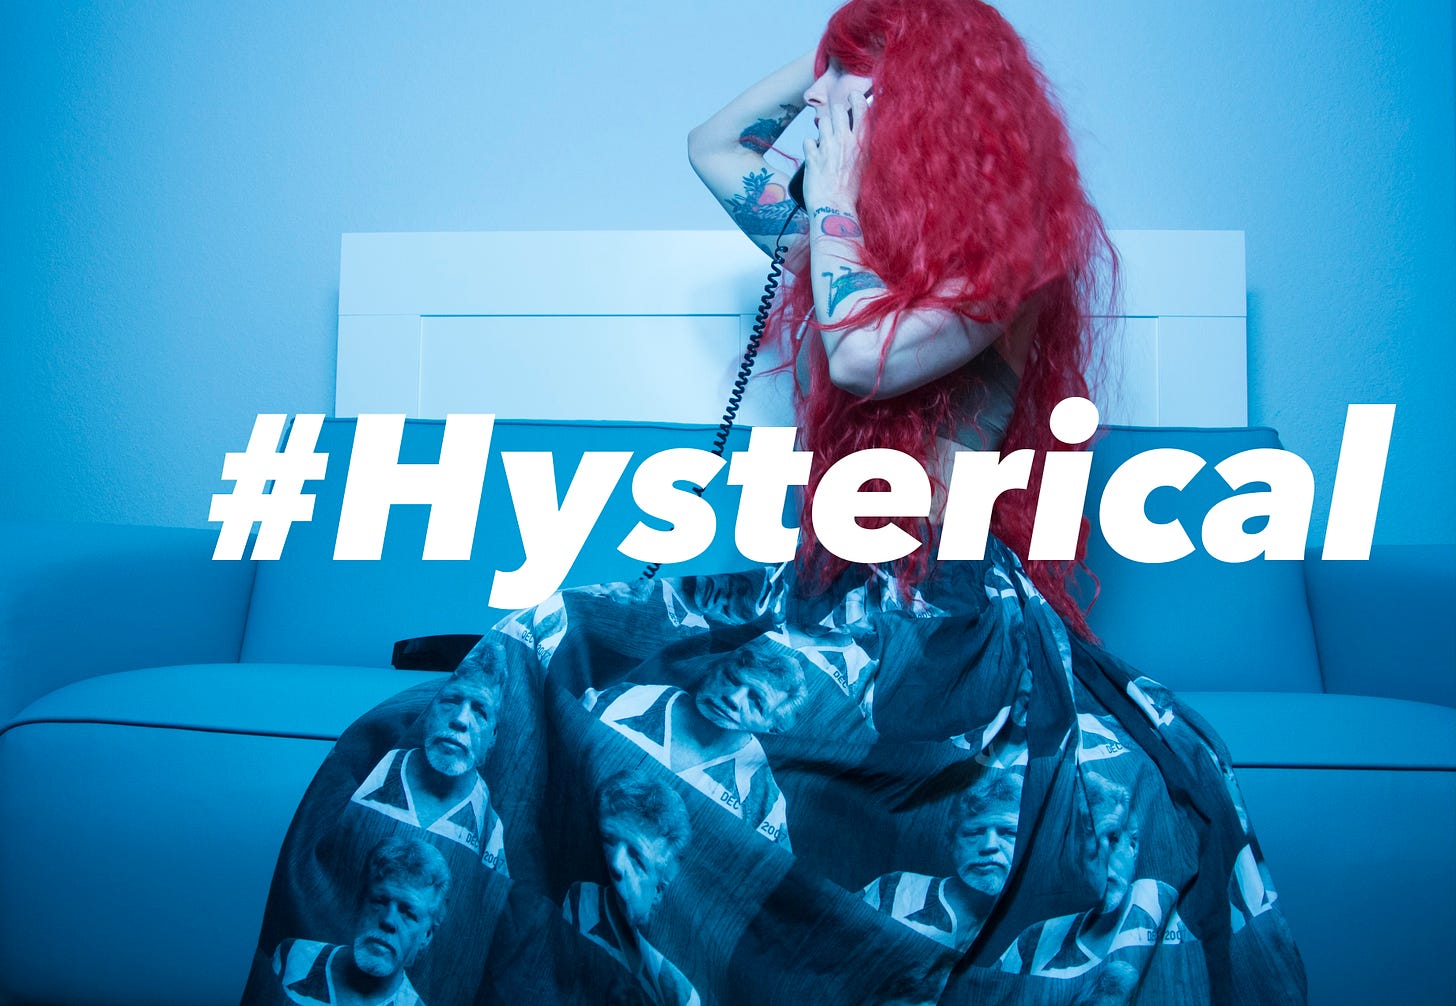 Karrie wearing a long red wig and a skirt printed with their brother's booking photo, striking a dramatic pose with one hand on forehead while on a telephone call. They are seared on a blue leather couch and the lighting is also blue. They wear an army green bra top. Overlaid text reads: #Hysterical